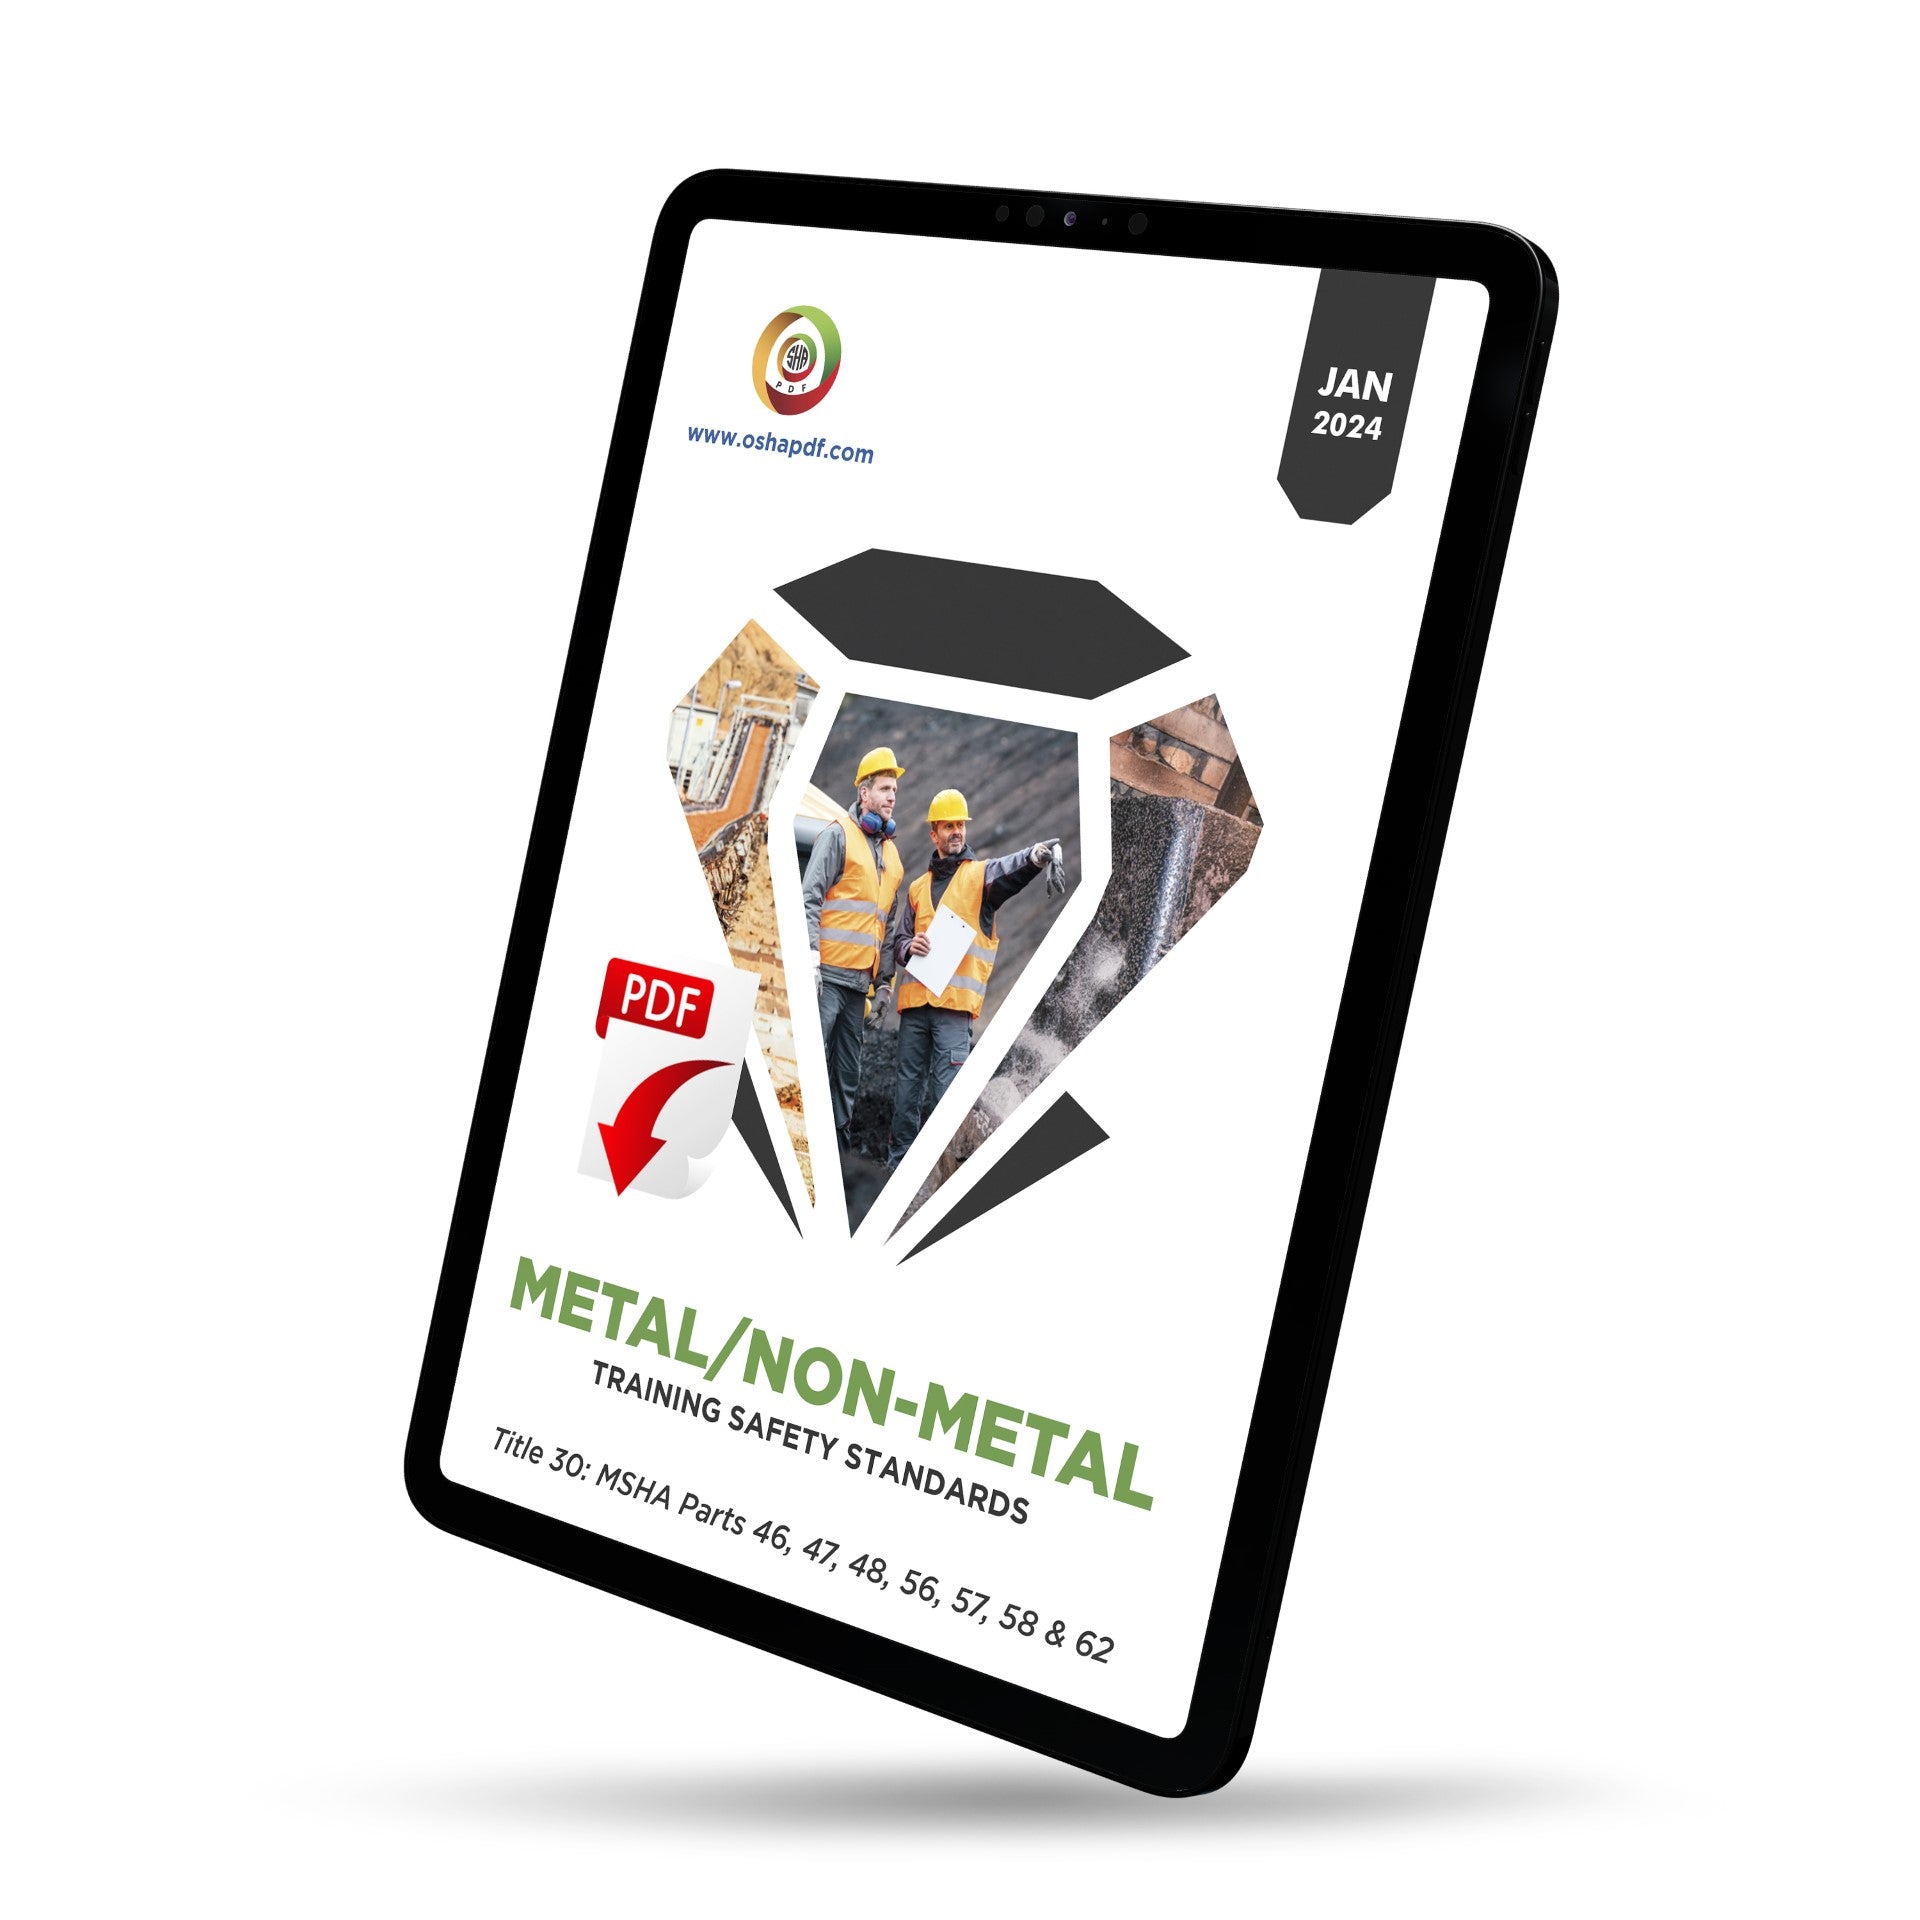 Metal/Nonmetal Training Safety Standards Pocket Guide - January 2024